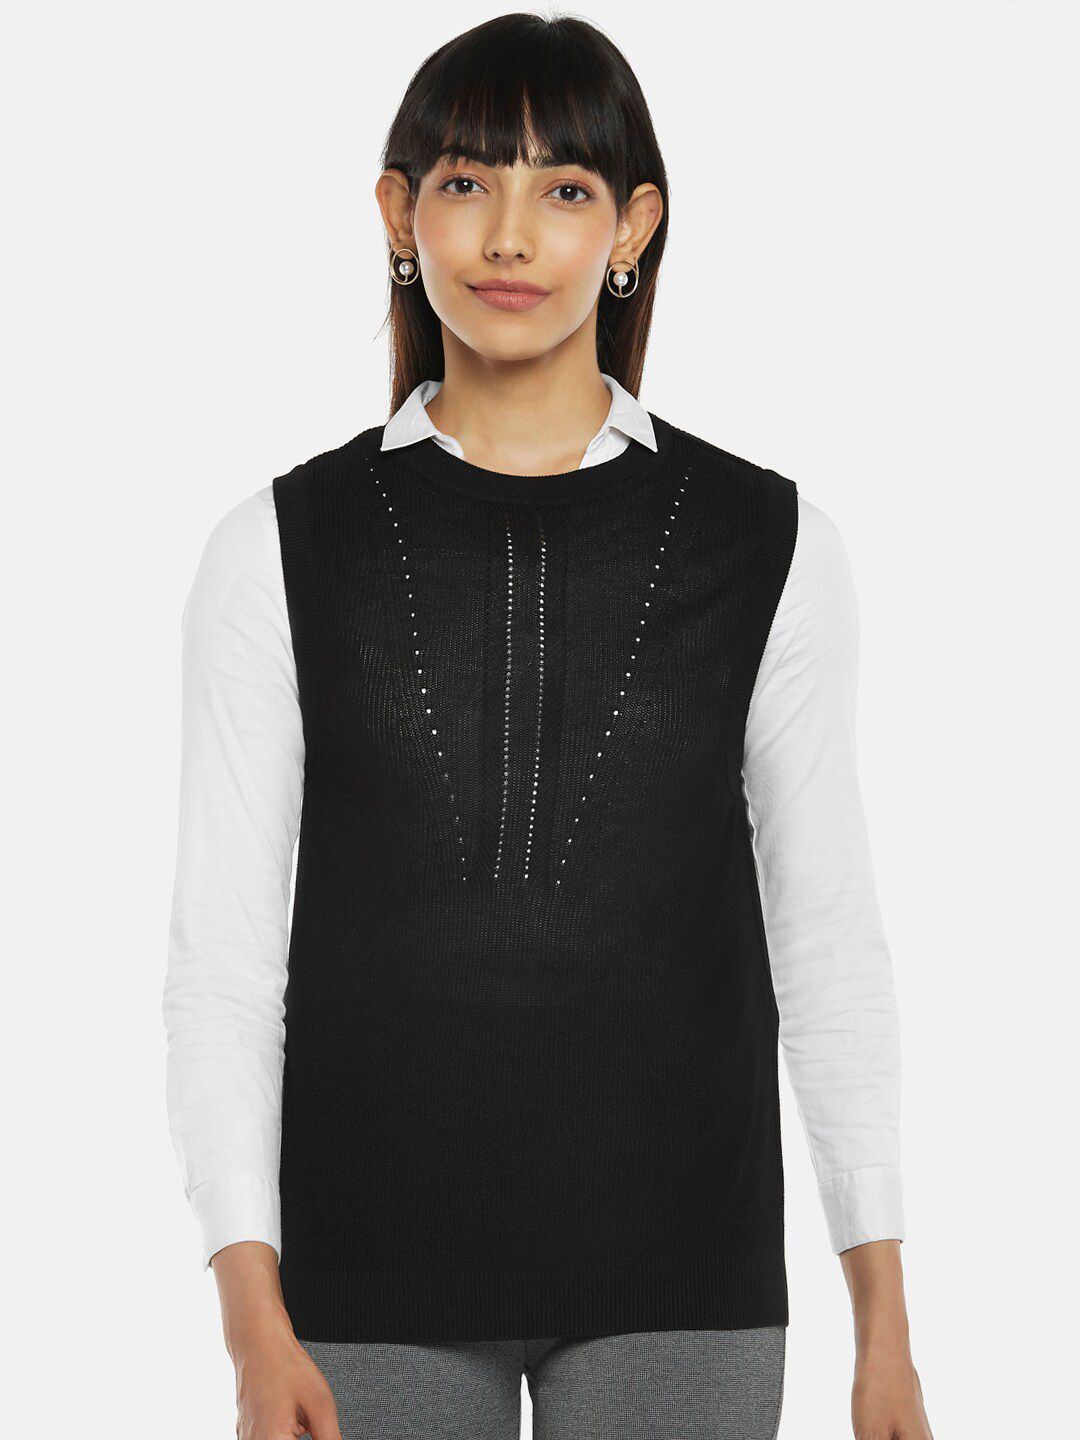 Annabelle by Pantaloons Women Black & White Full Sleeve Top Price in India